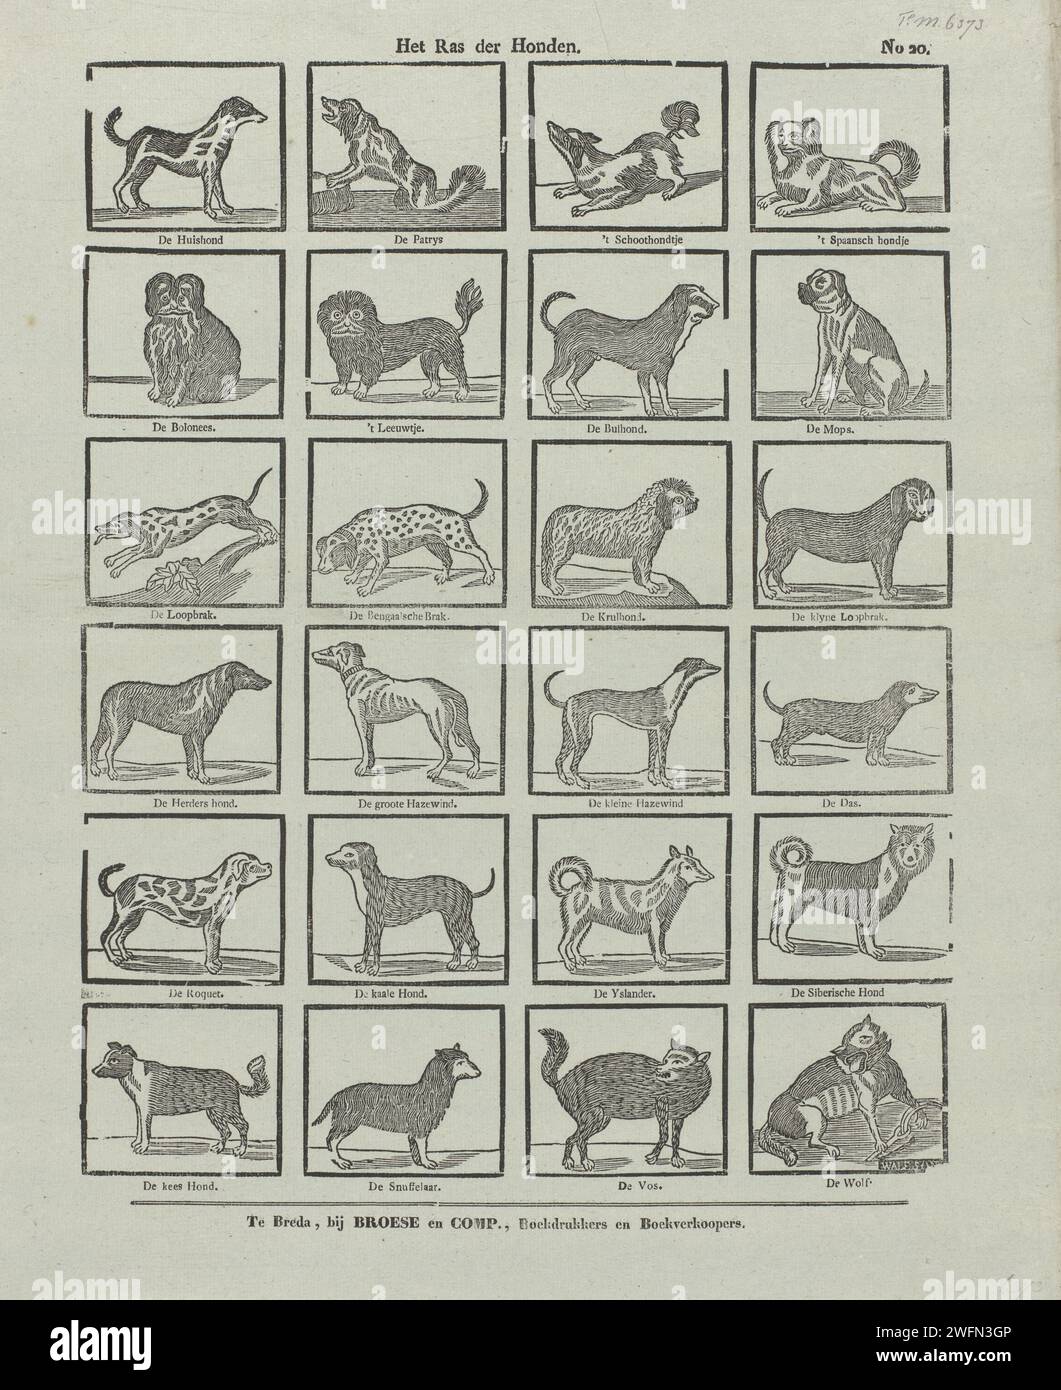 Het Ras der Dogs, Johannis Waleson, 1828 - 1853 print Leaf with 24 performances of various dog breeds, such as the house dog, 't Schoothondje and the pugs. Under each image the breed name. Numbered at the top right: No. 20. Breda paper letterpress printing dog Stock Photo